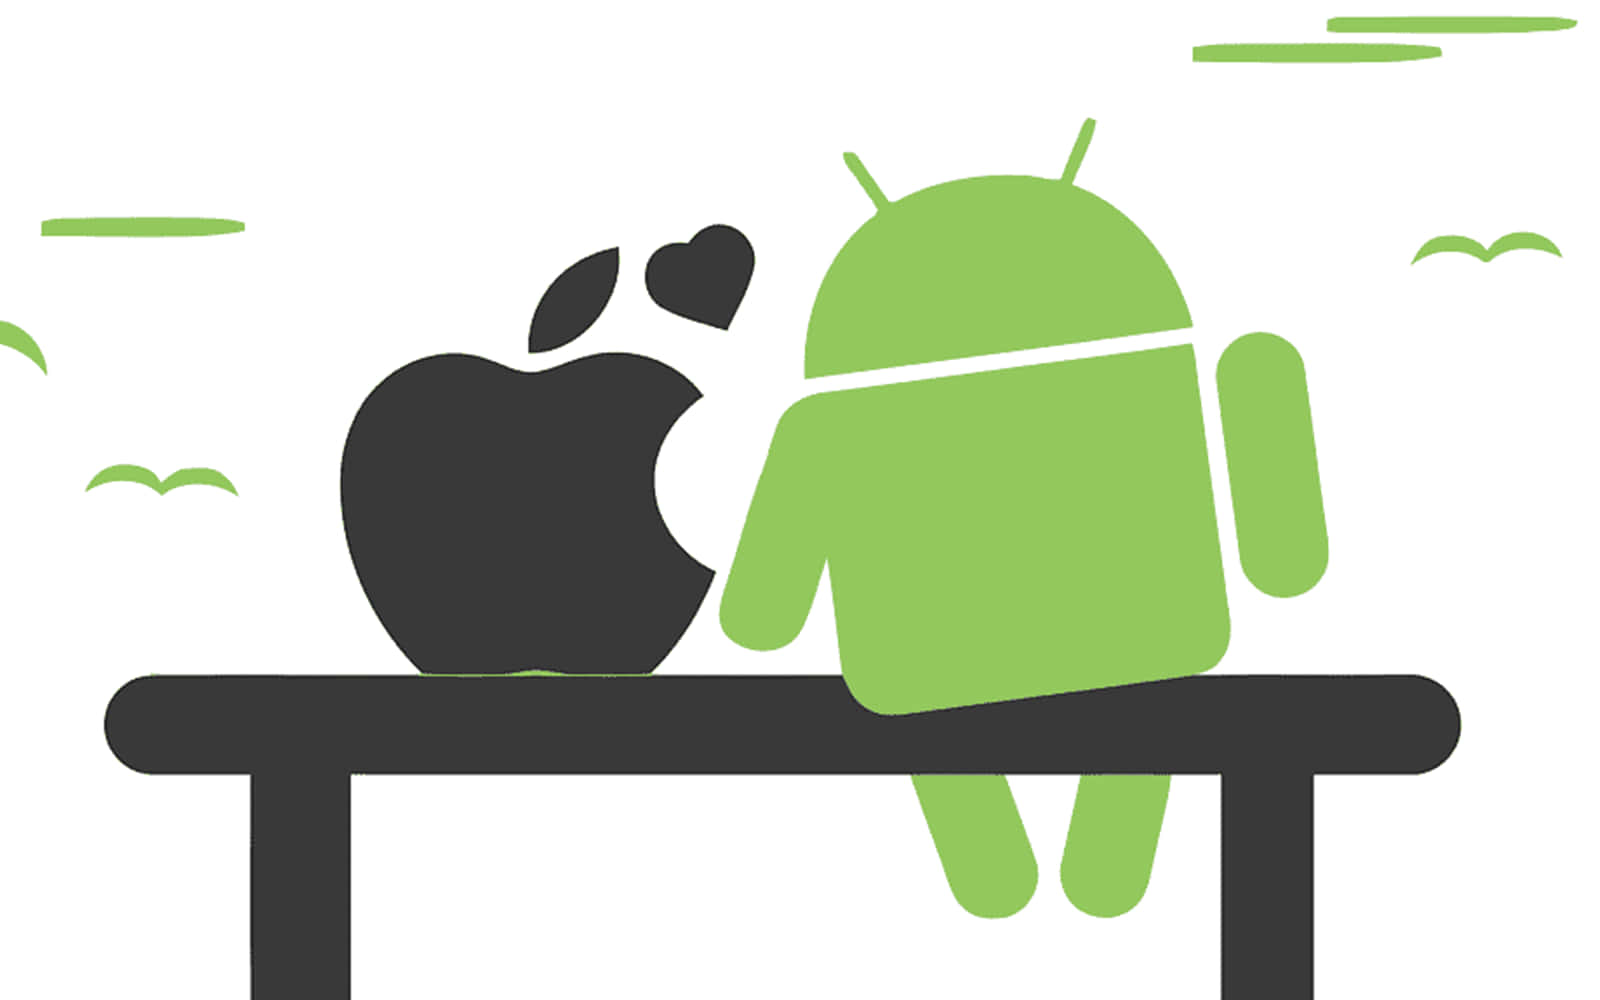 Apple & Android: The Two Tech Giants Wallpaper